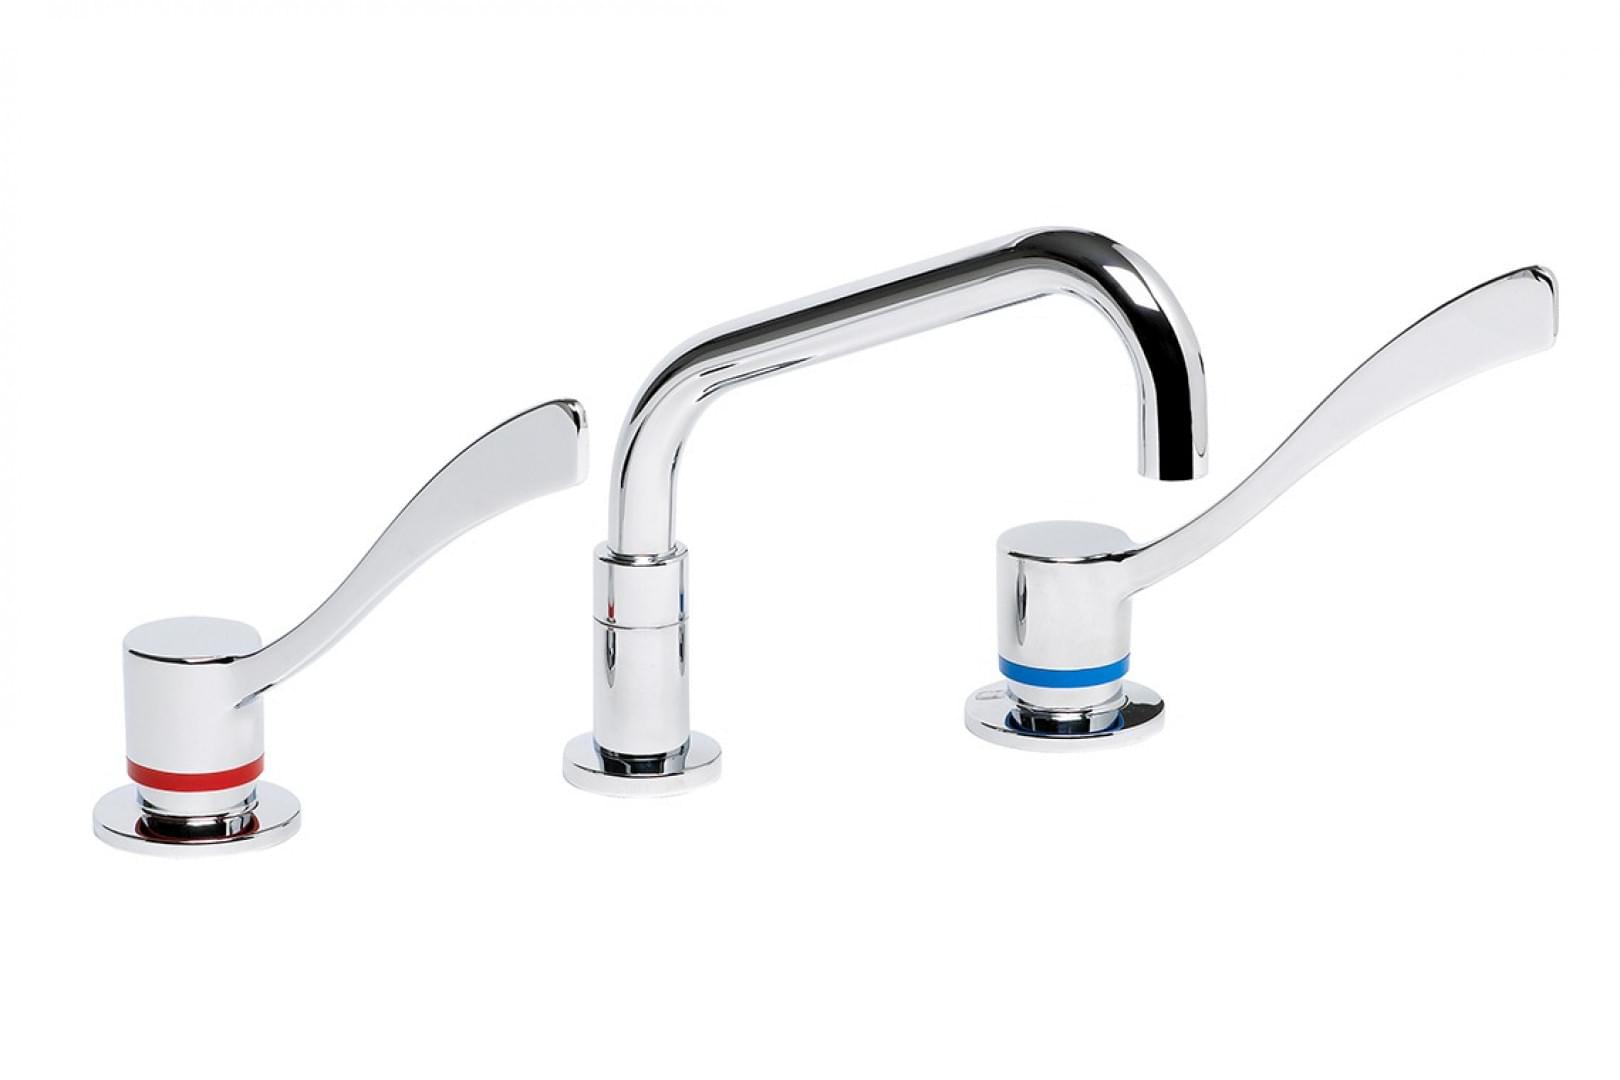 Leva 150mm Sink Set with SPC010 Fixed Aerated Spout - LEV150307 from Enware